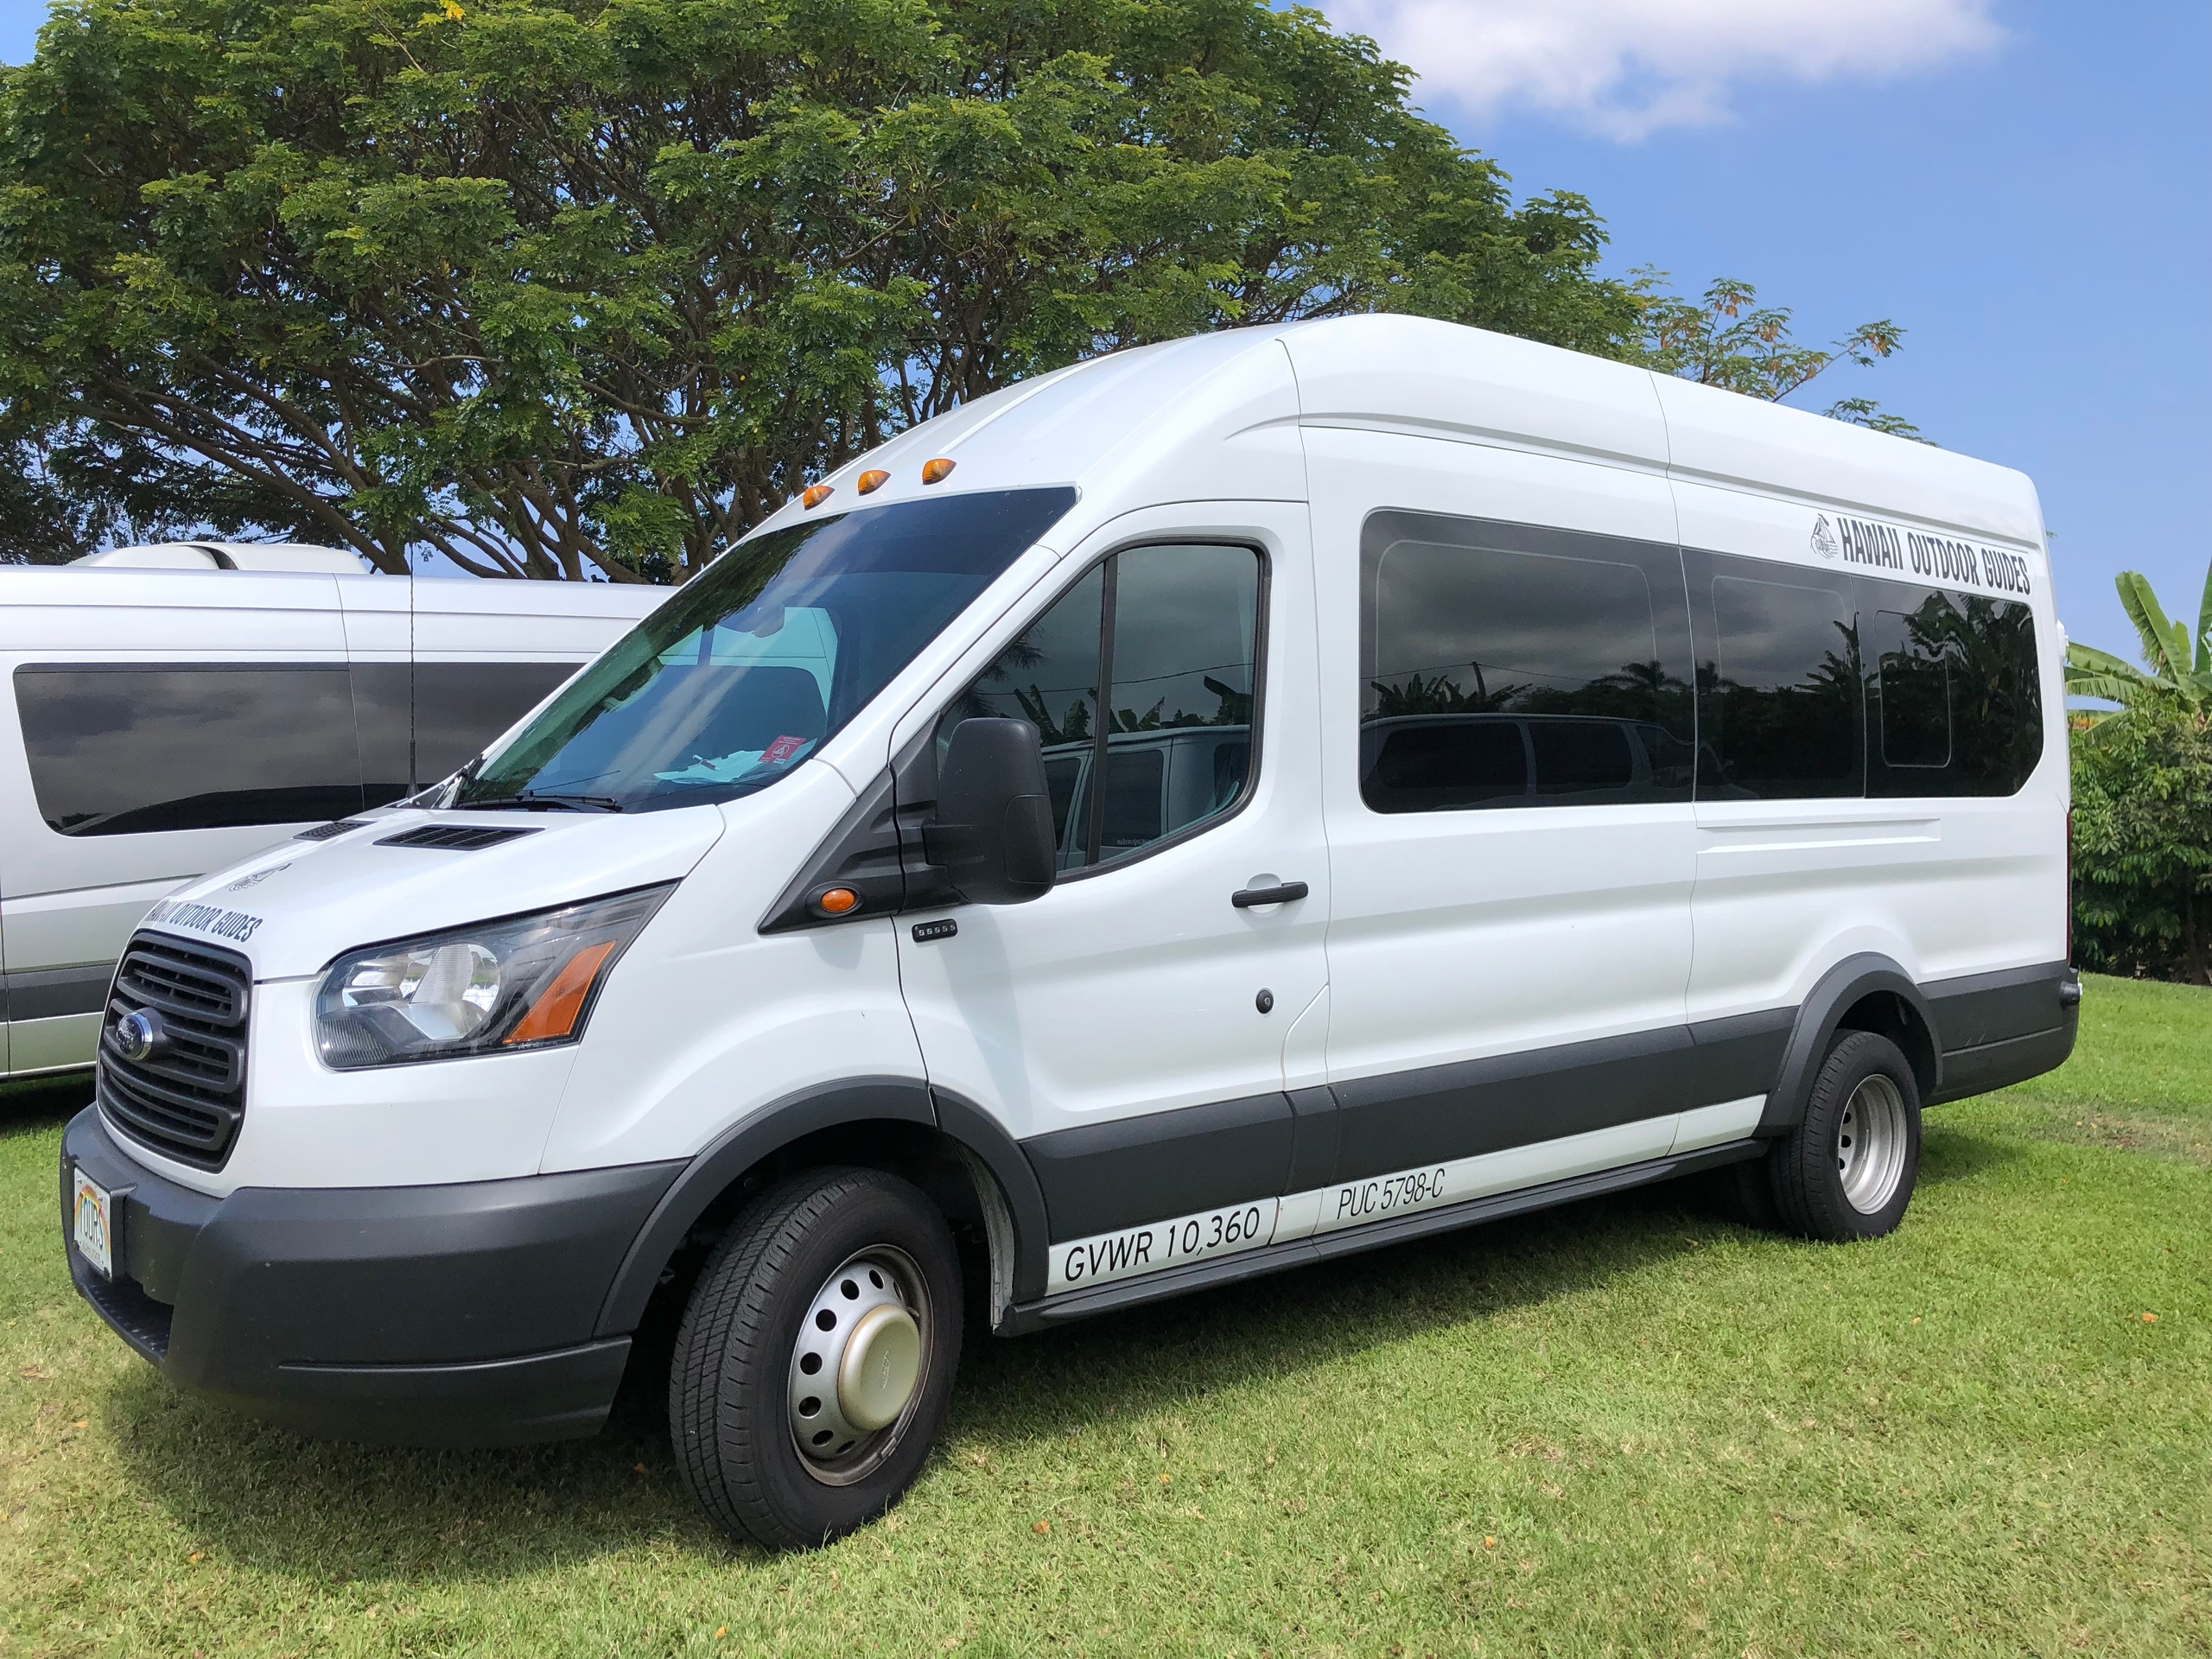 Private Oahu Ultimate Circle Island Tour Up To 14 Passengers